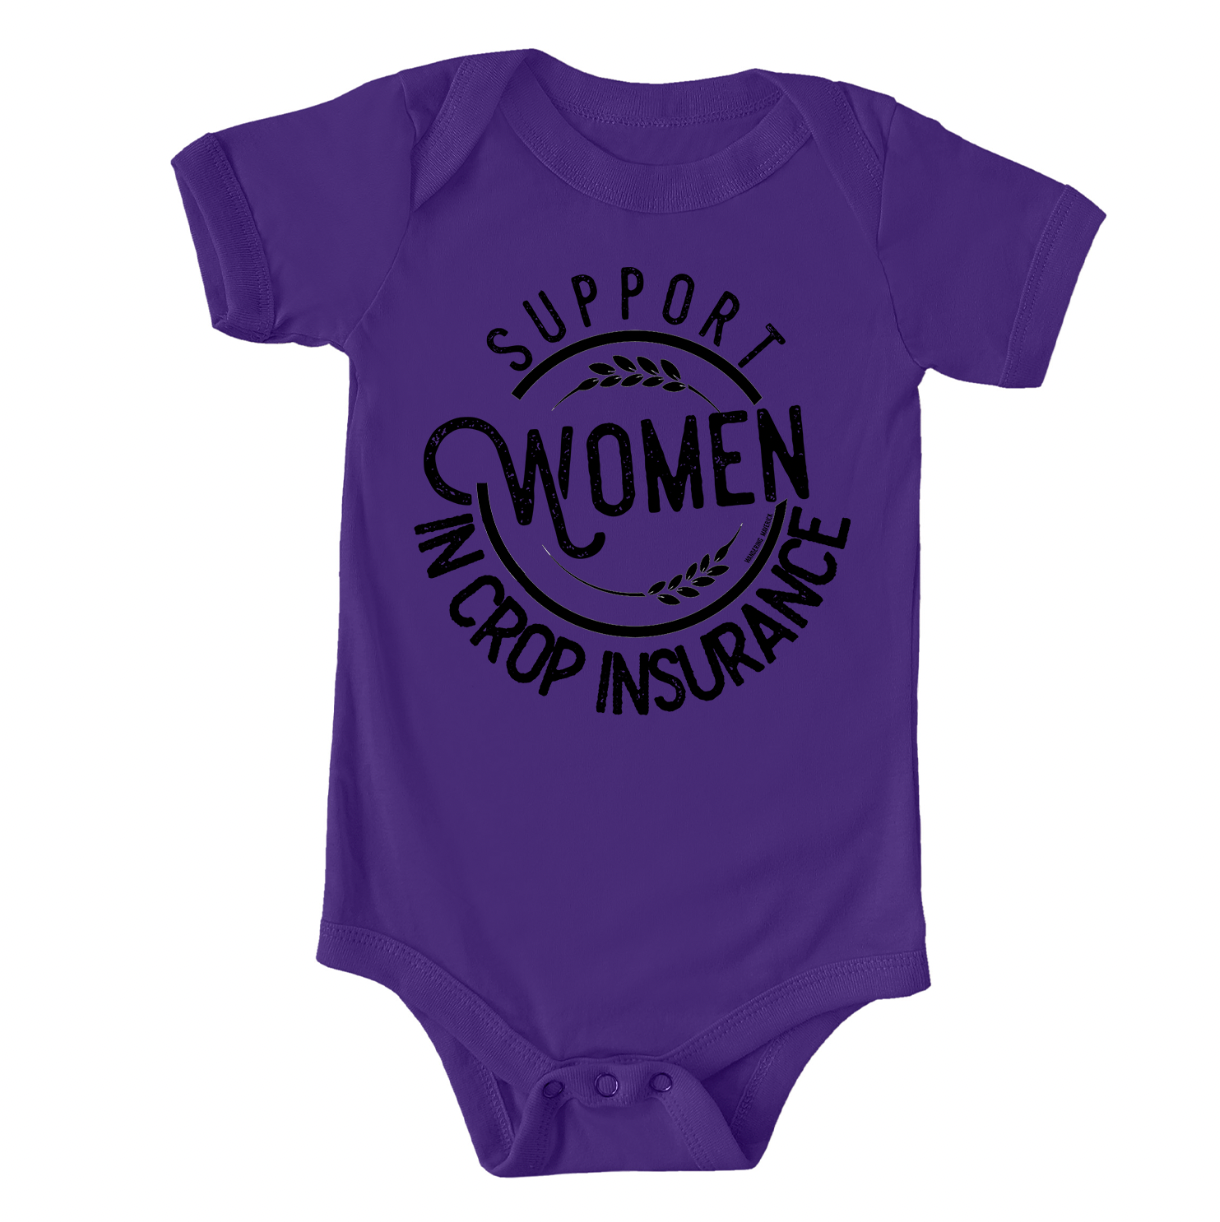 Support Women In Crop Insurance One Piece/T-Shirt (Newborn - Youth XL) - Multiple Colors!